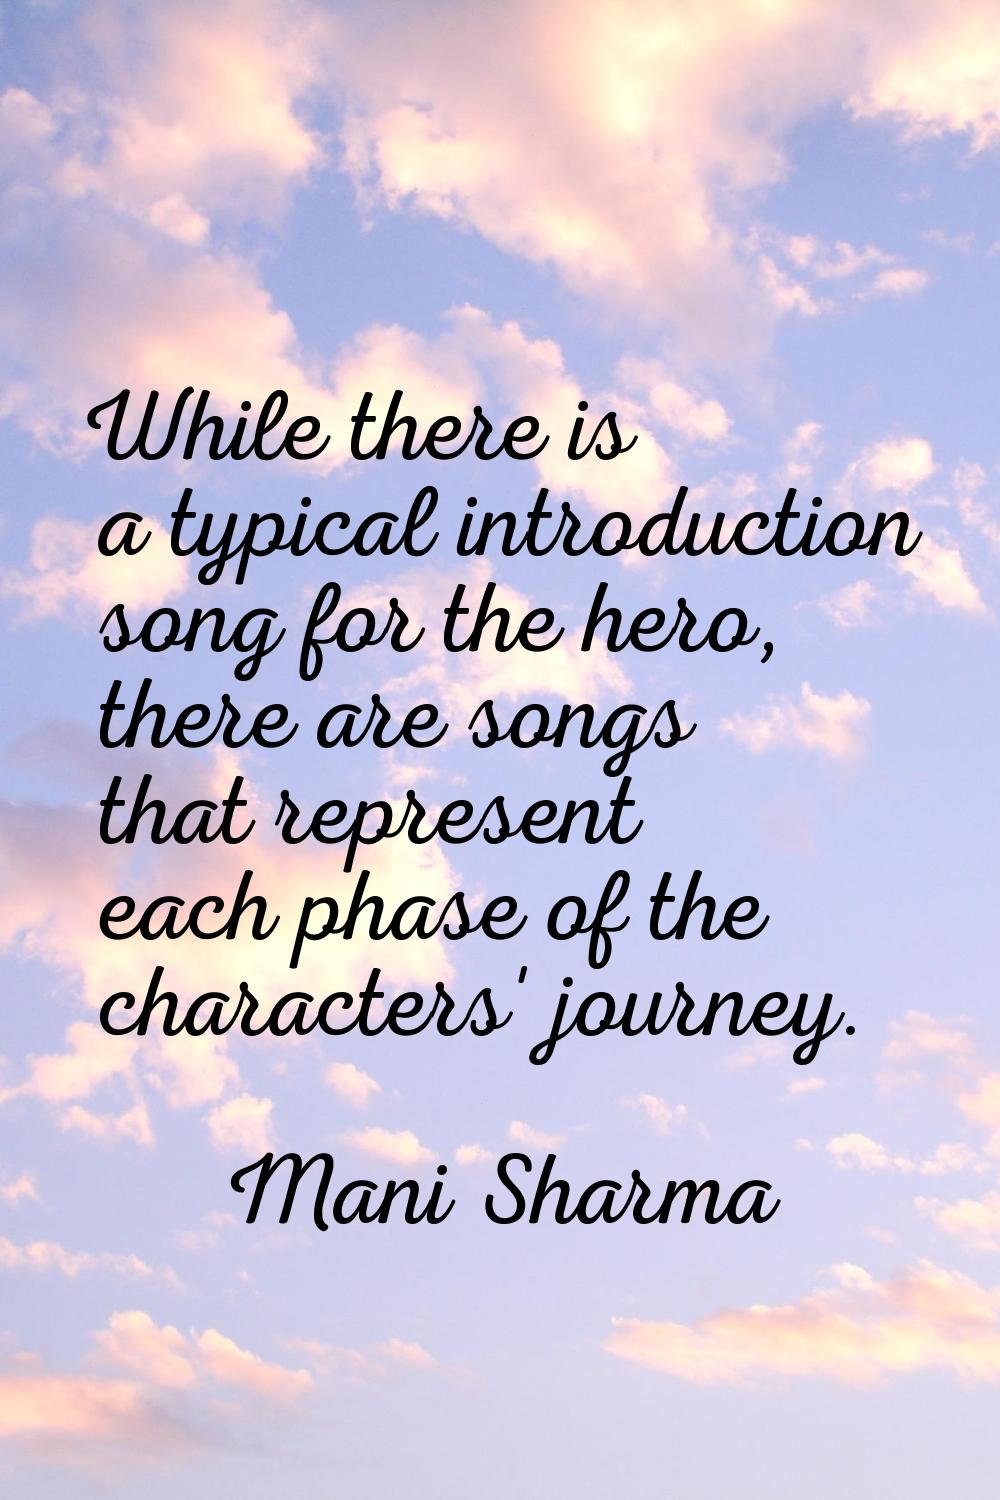 While there is a typical introduction song for the hero, there are songs that represent each phase 